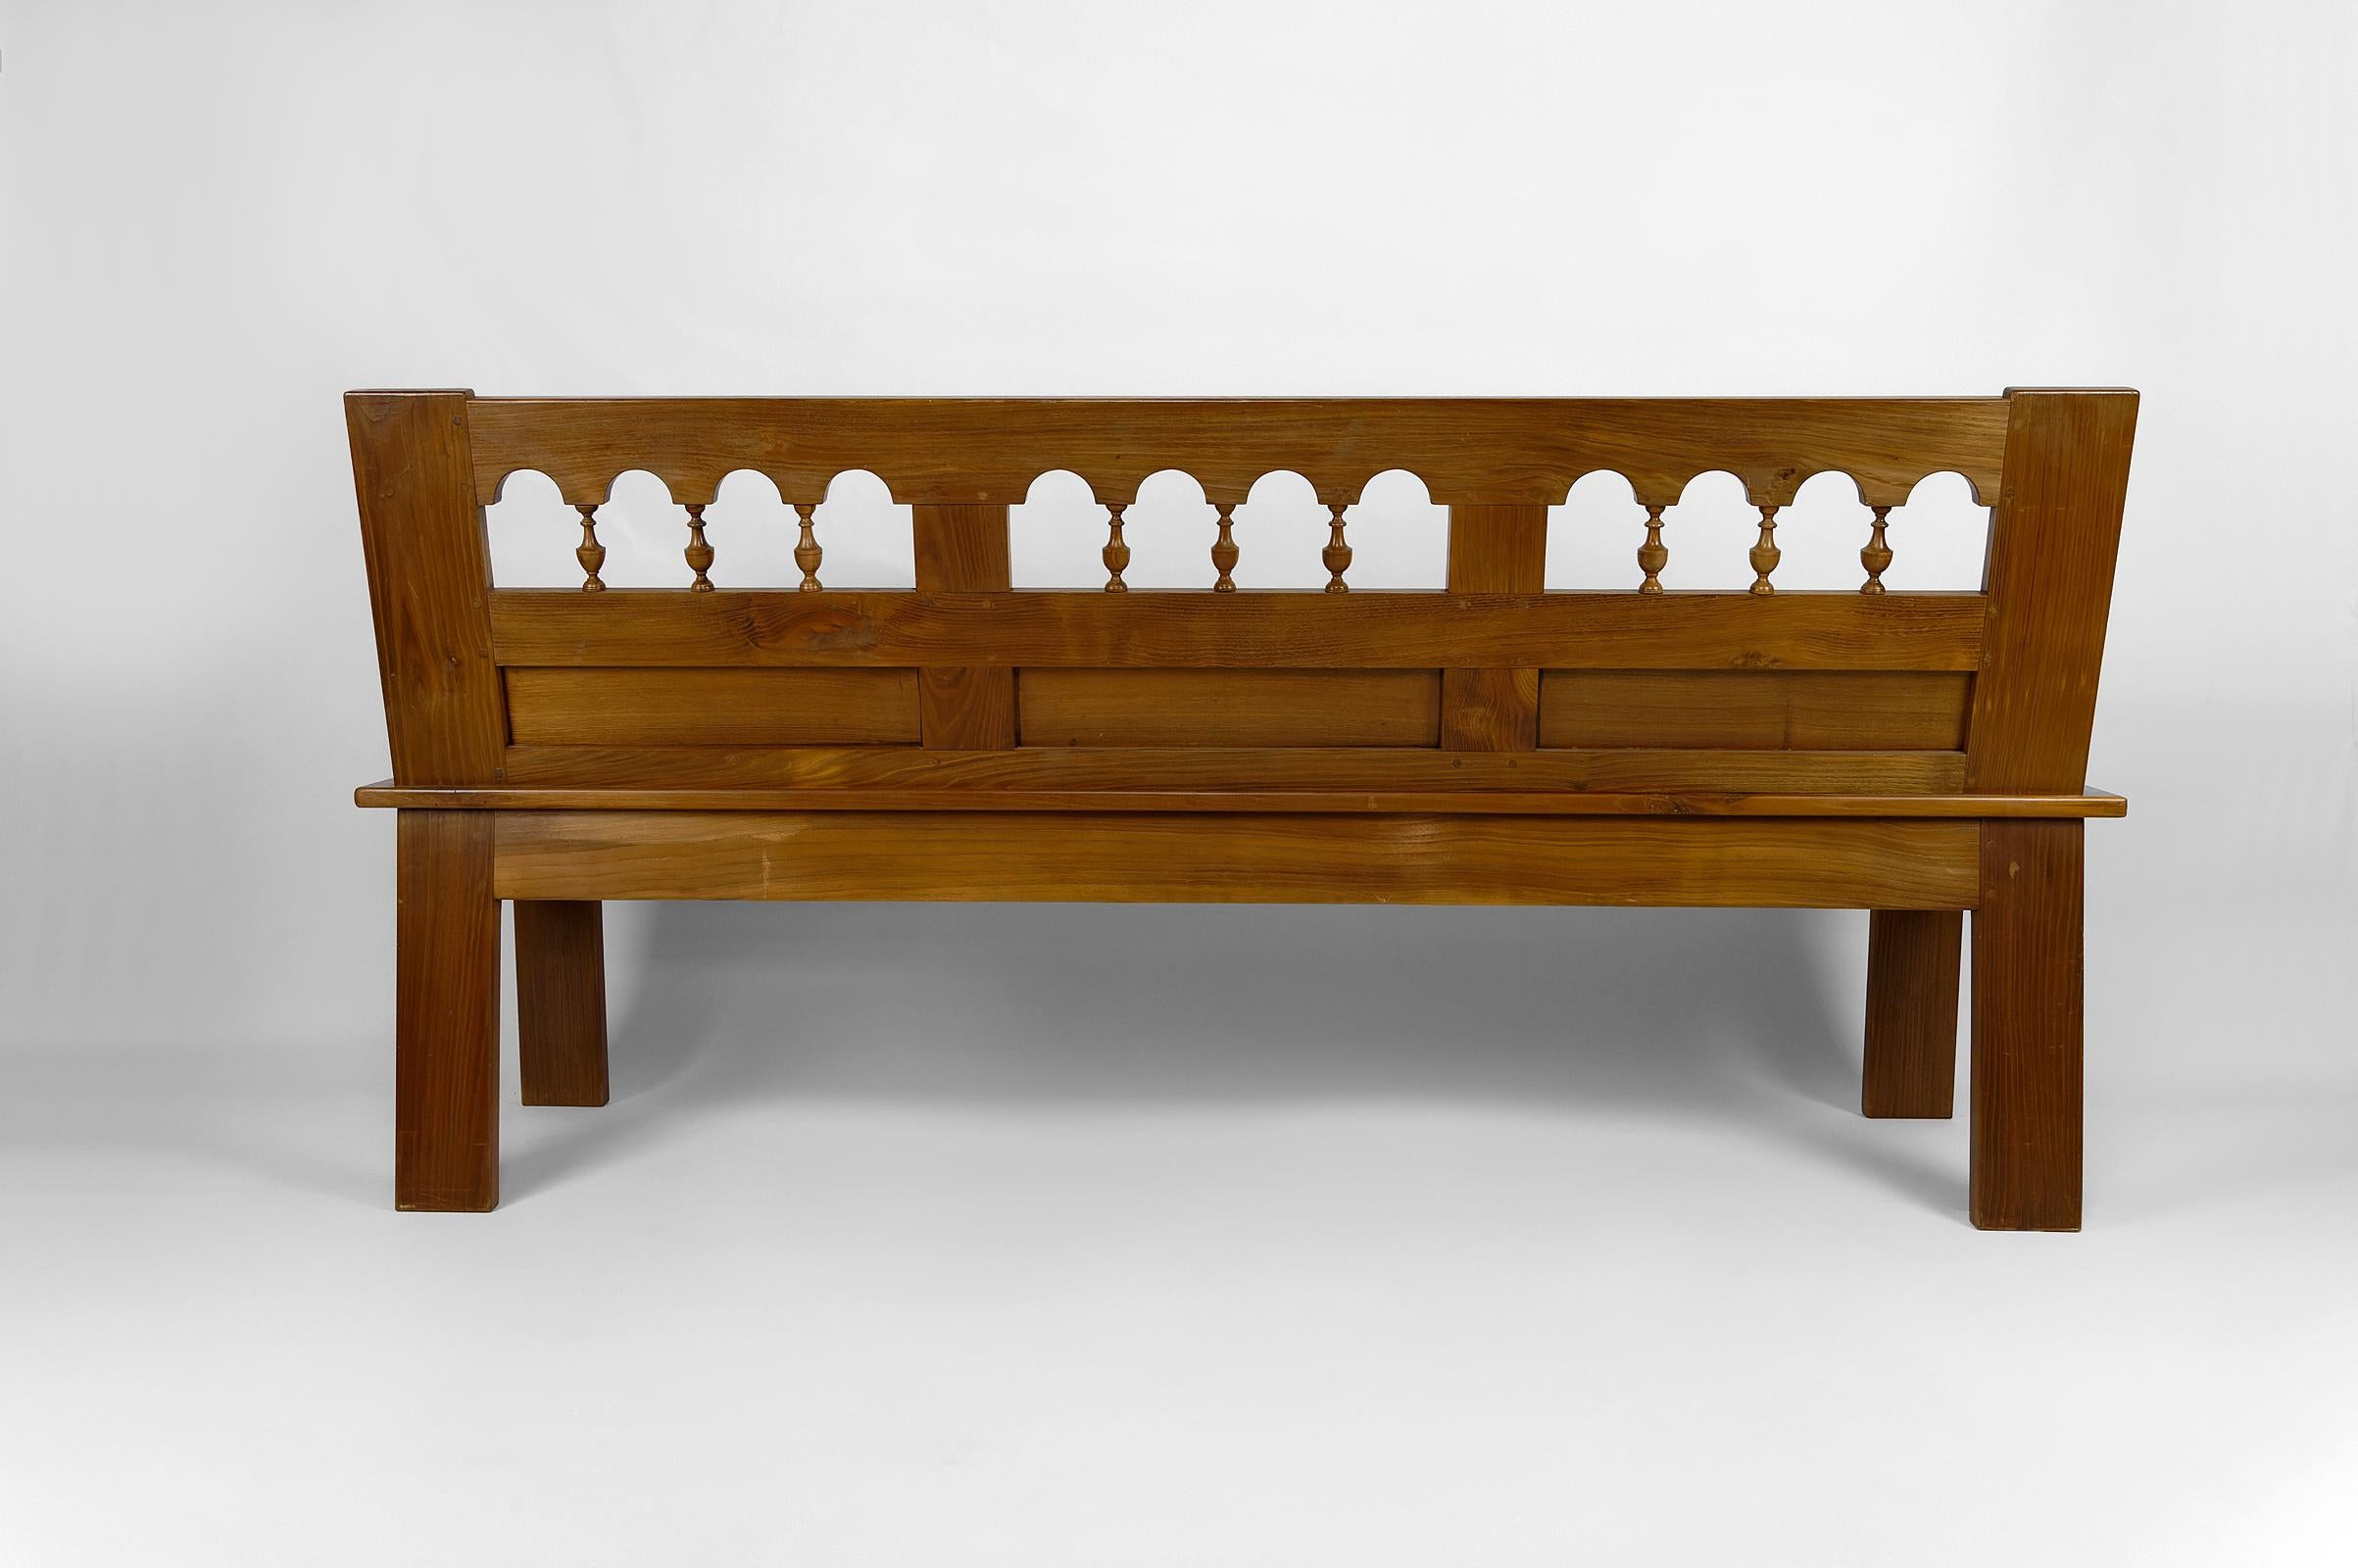 20th Century Rustic Carved Oak Farmhouse Bench, France, 20th century